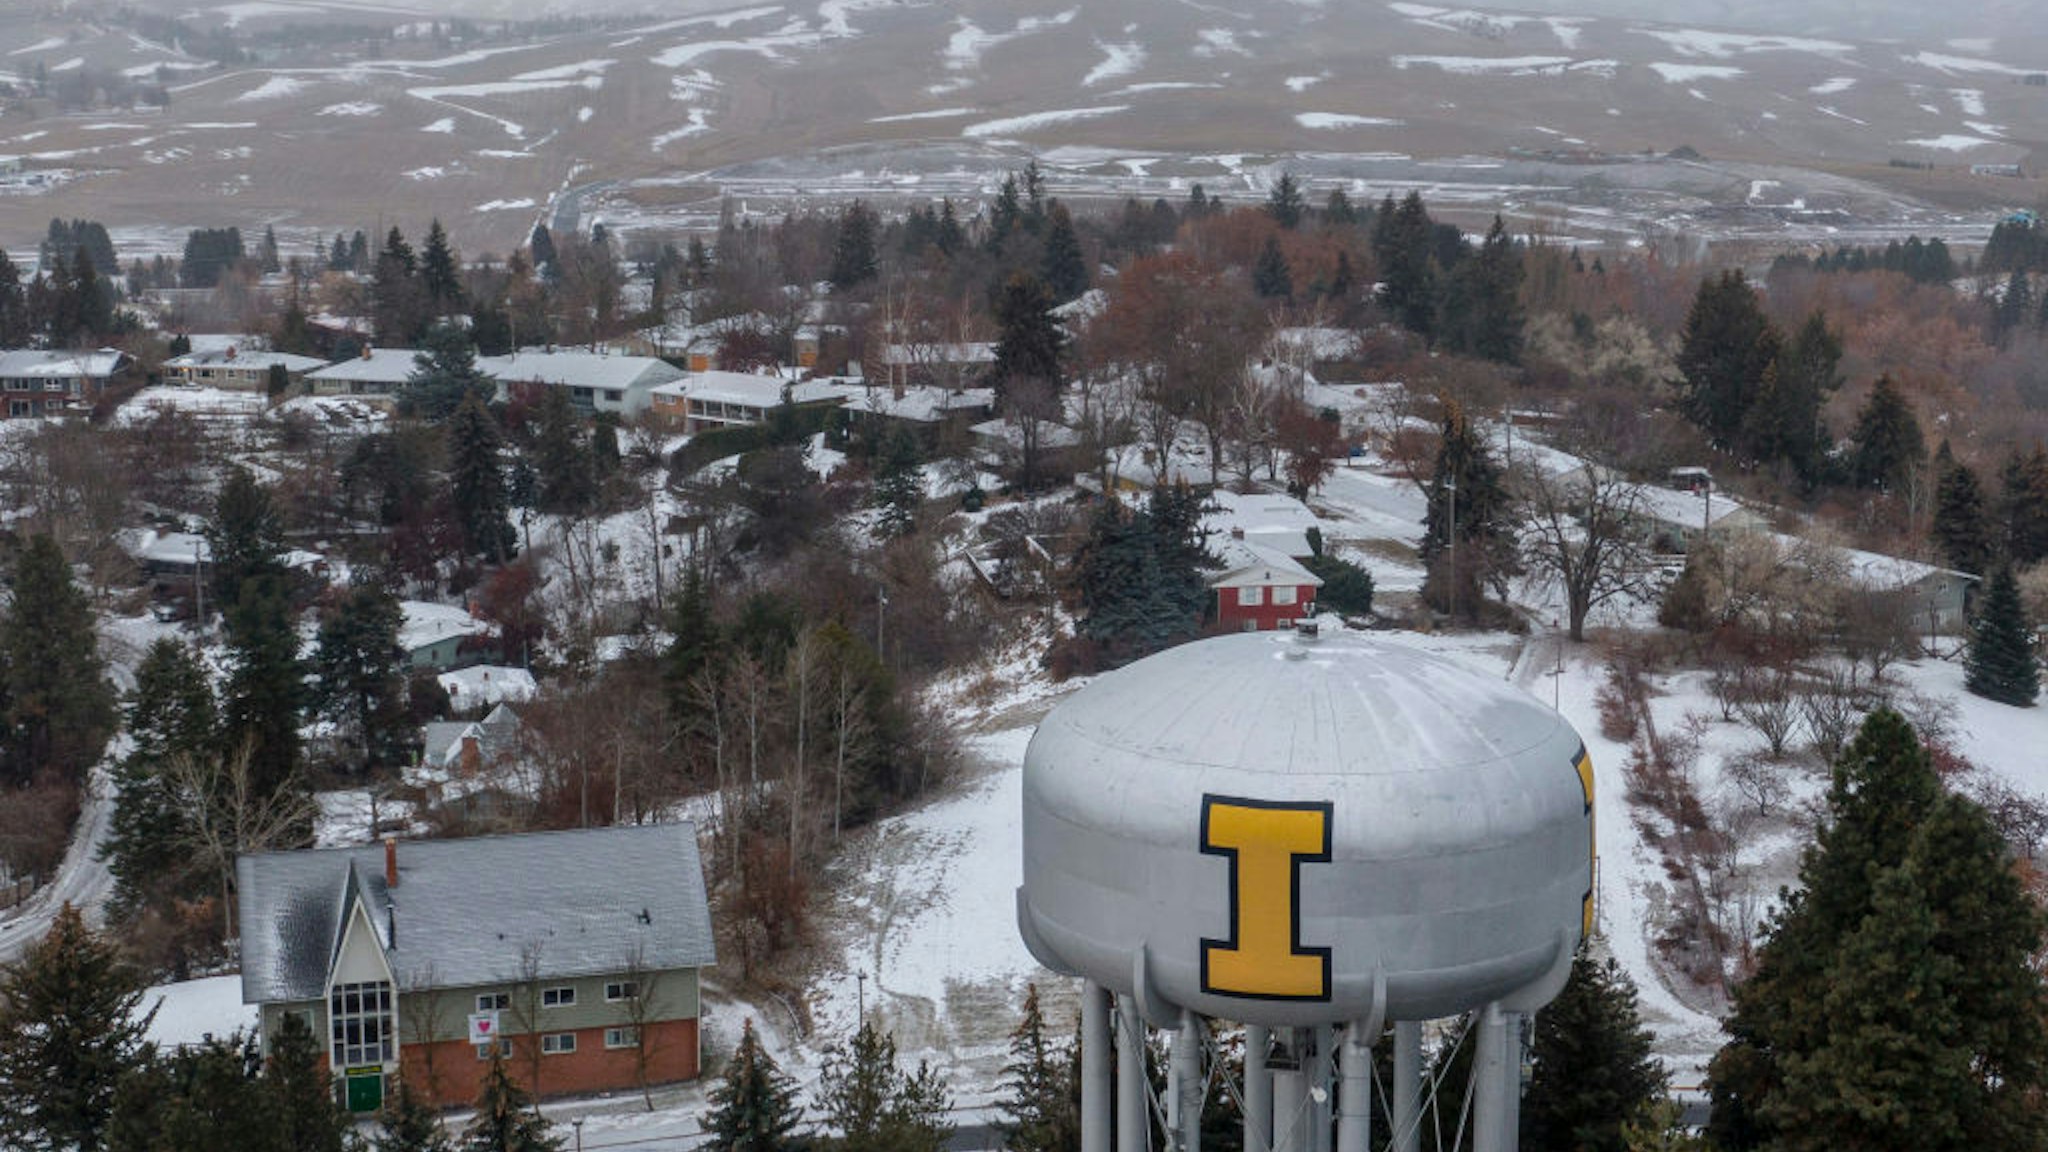 In this aerial view, the town of Moscow is seen near the neighborhood of a home that is the site of a quadruple murder on January 3, 2023 in Moscow, Idaho.